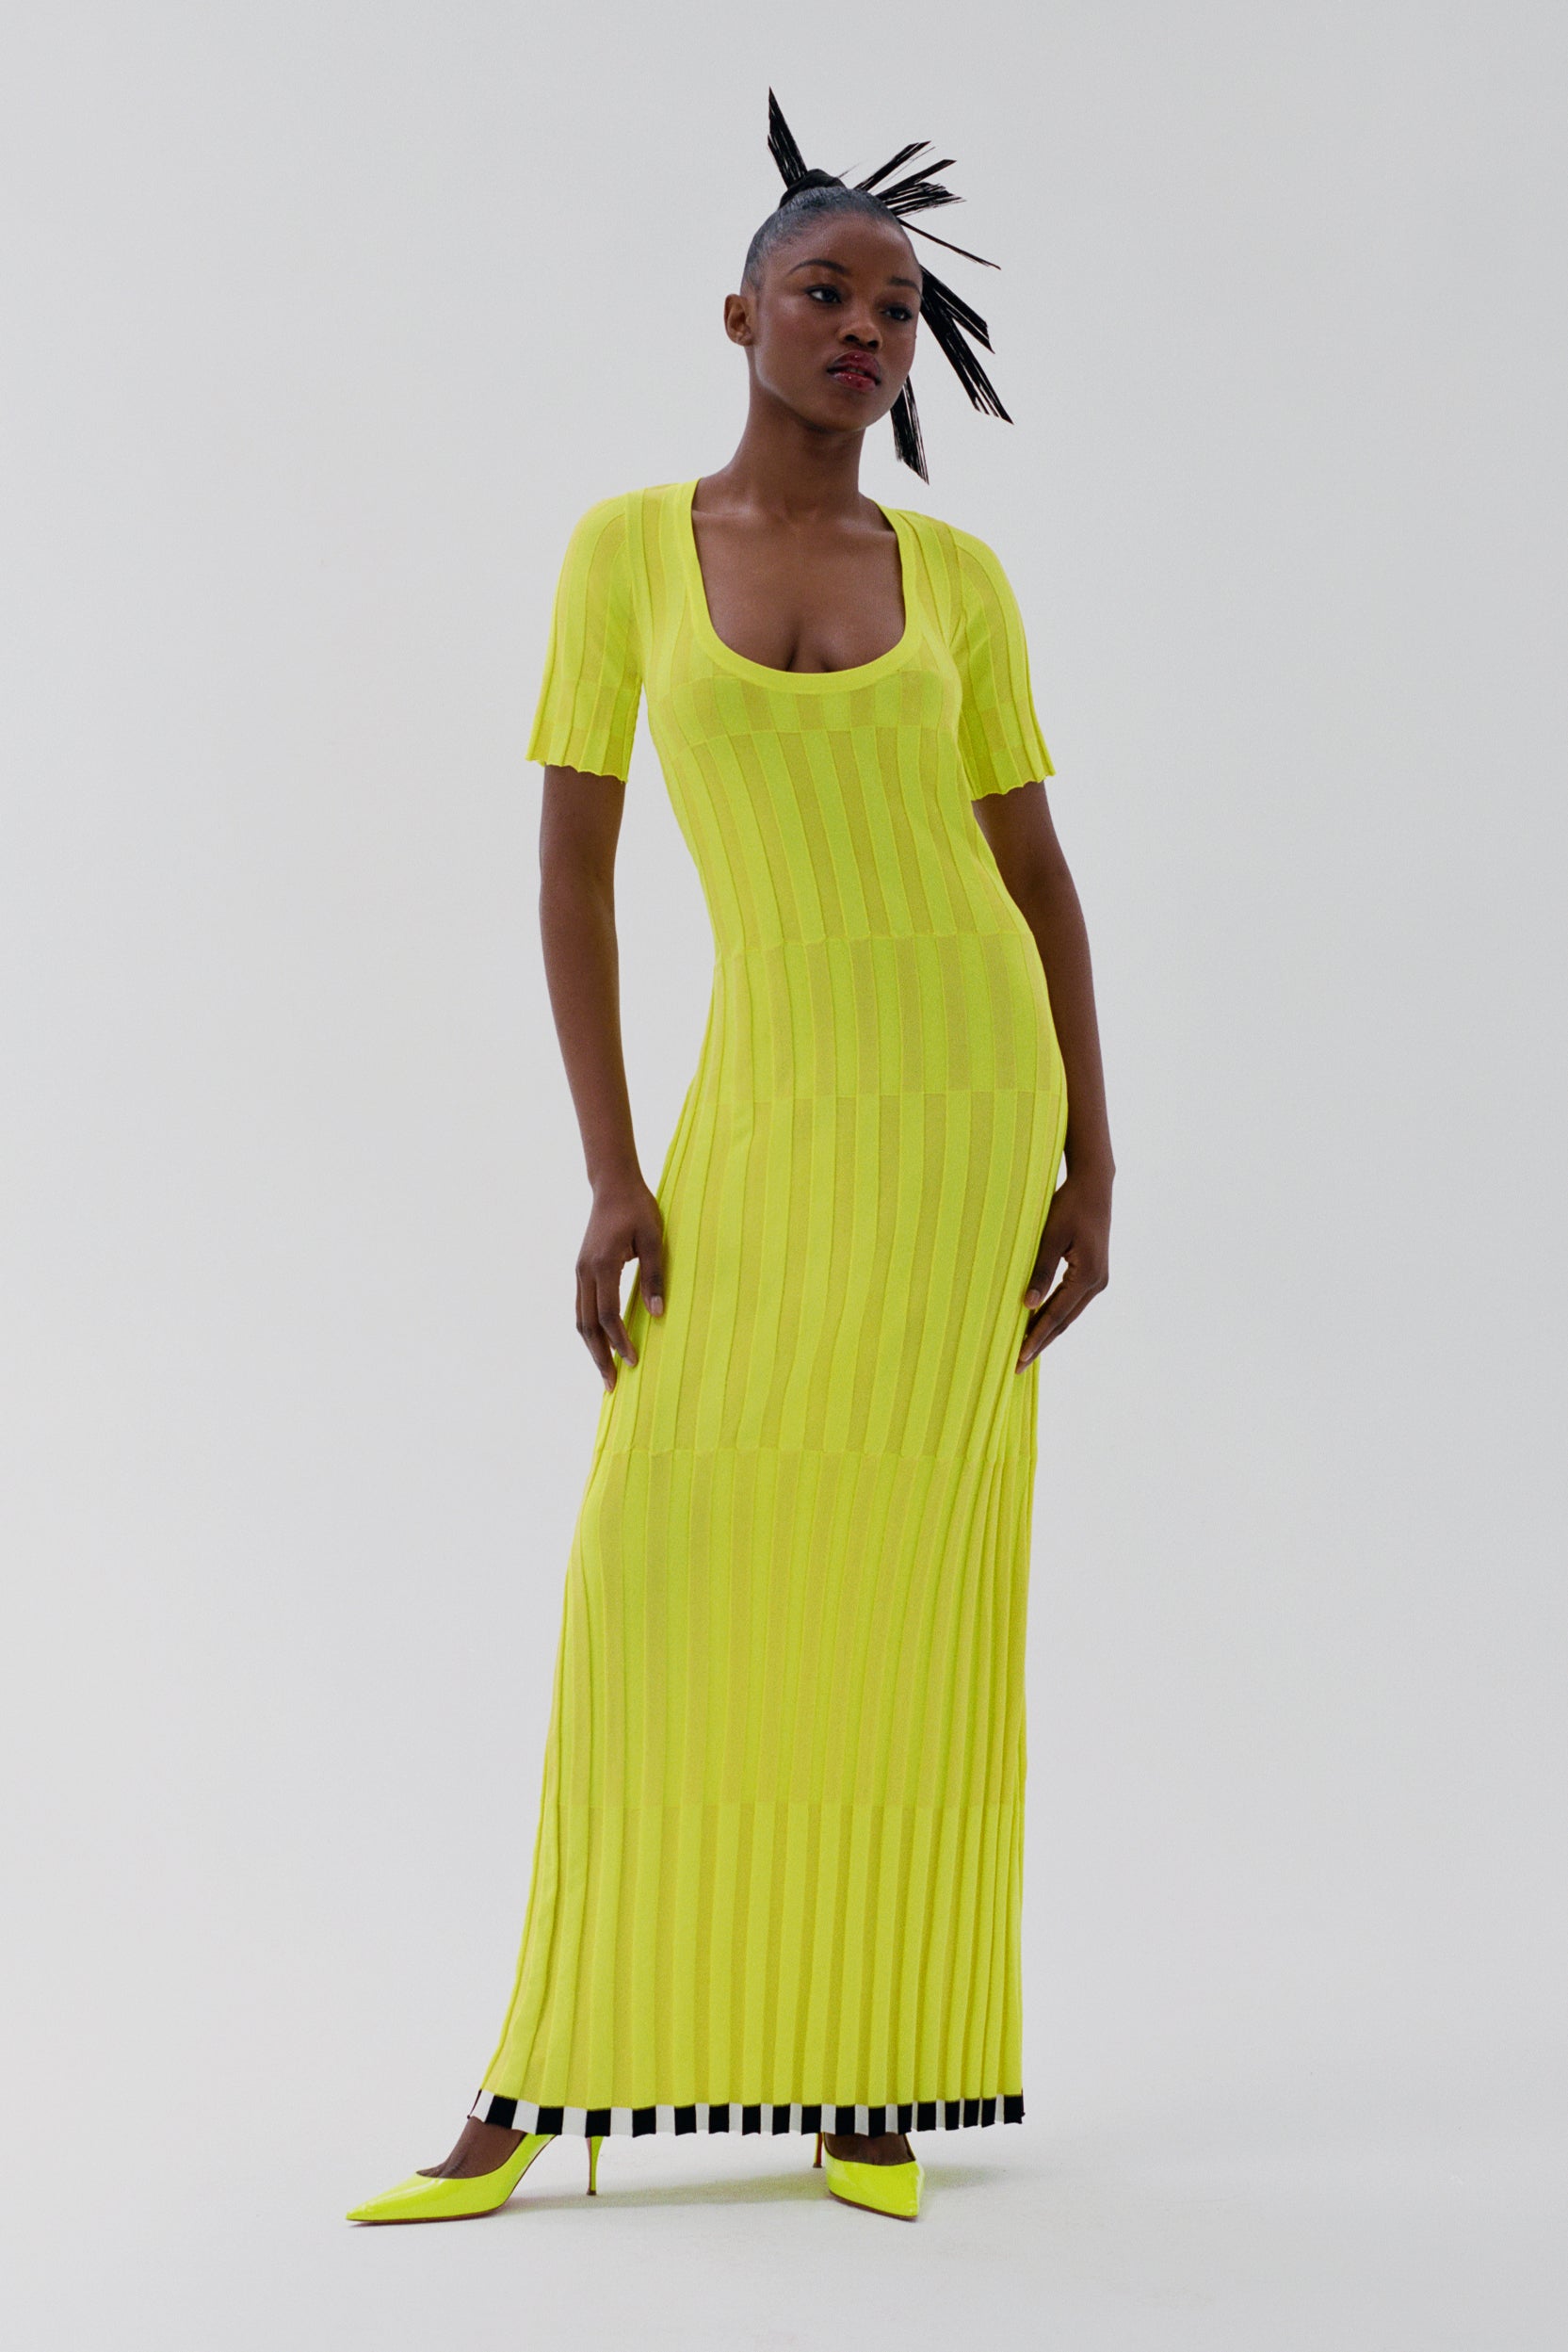 Christopher John Rogers Leans Into Pure Serendipity For His Latest Collection